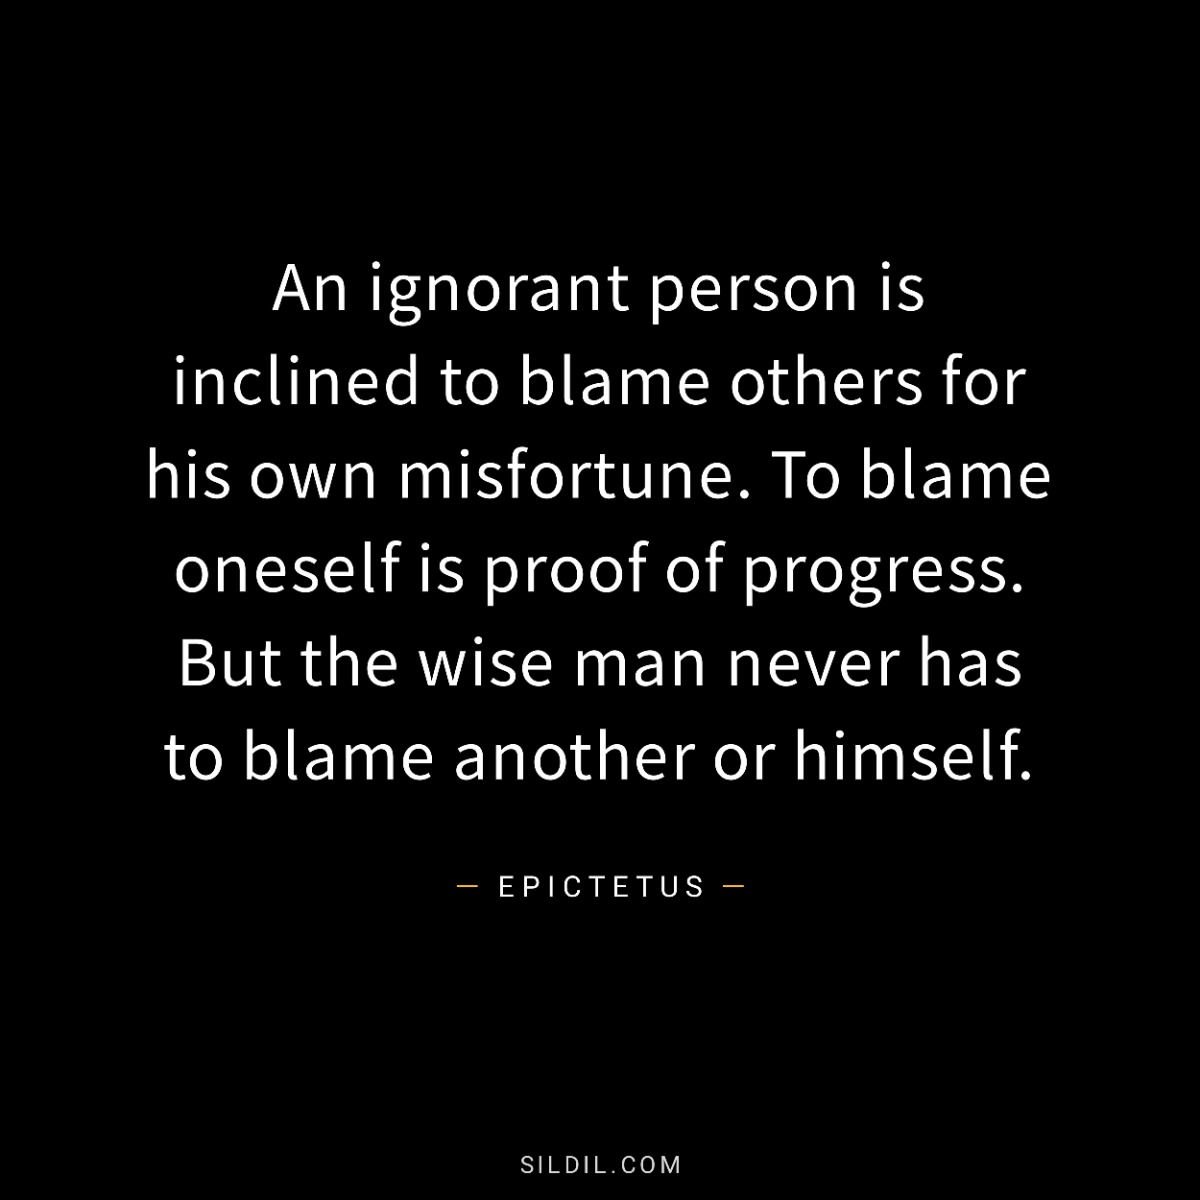 An ignorant person is inclined to blame others for his own misfortune. To blame oneself is proof of progress. But the wise man never has to blame another or himself.